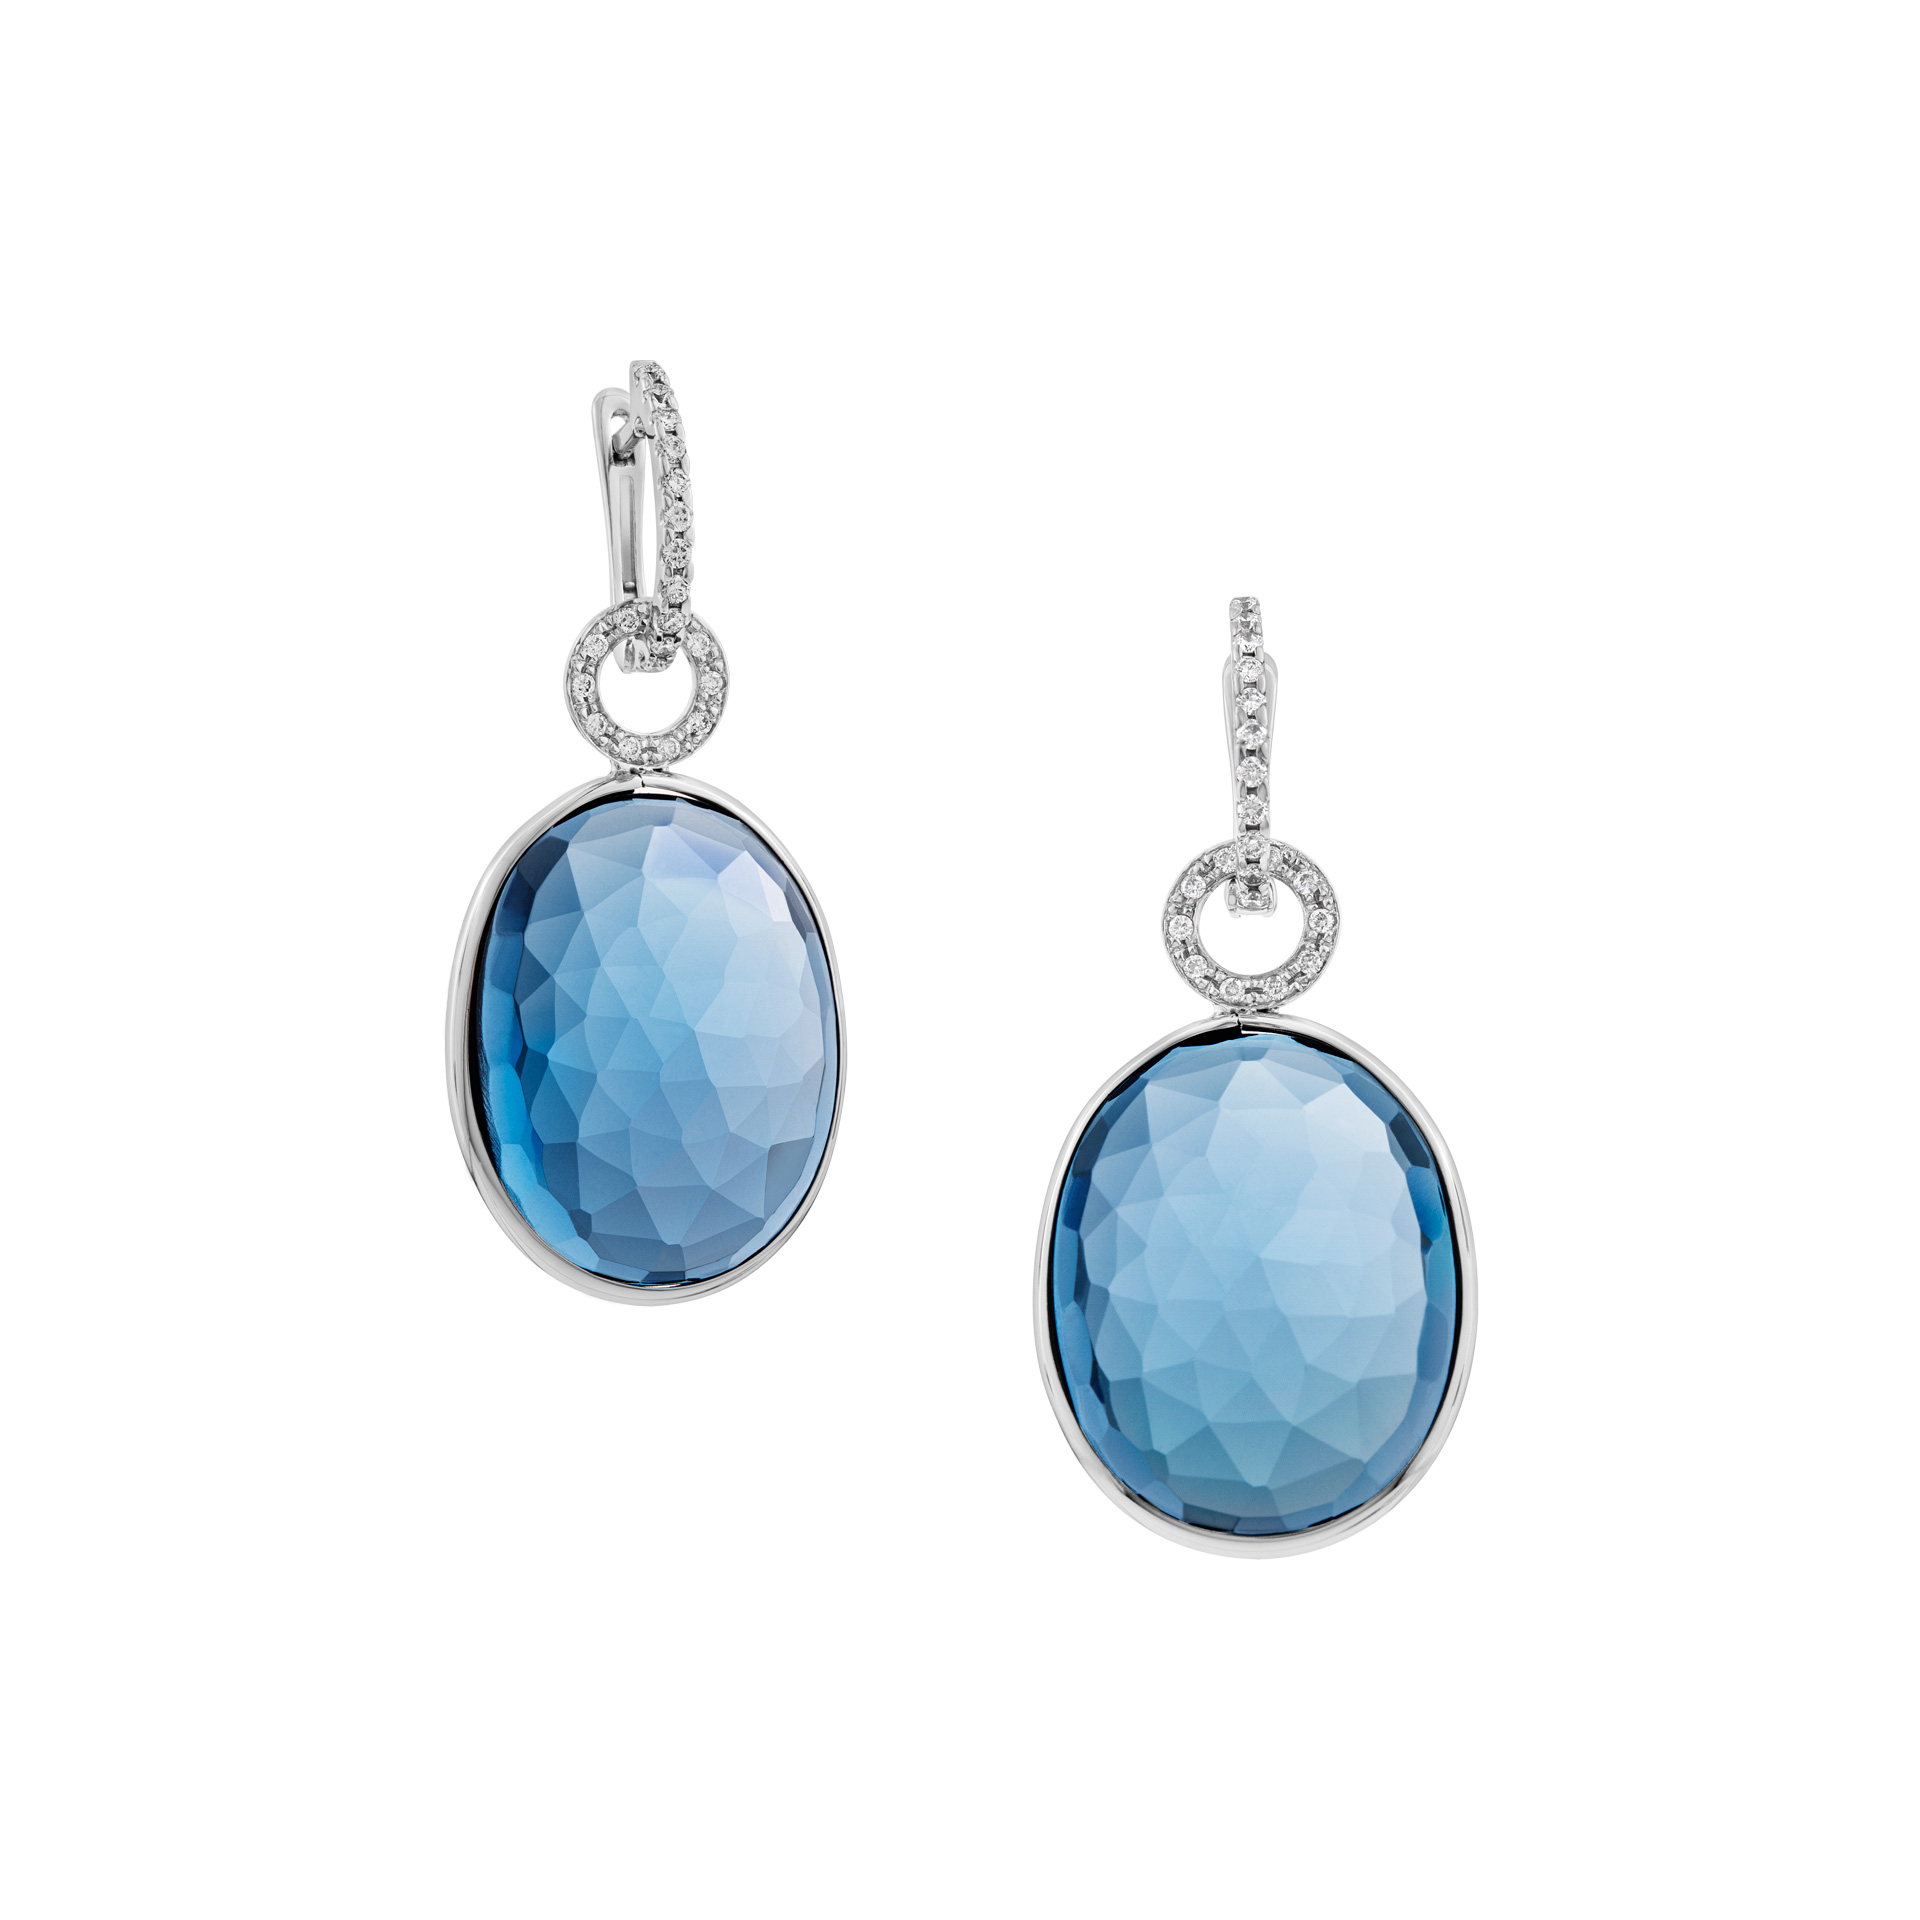 London Blue Topaz earrings in 18K white gold with diamond accents image 1